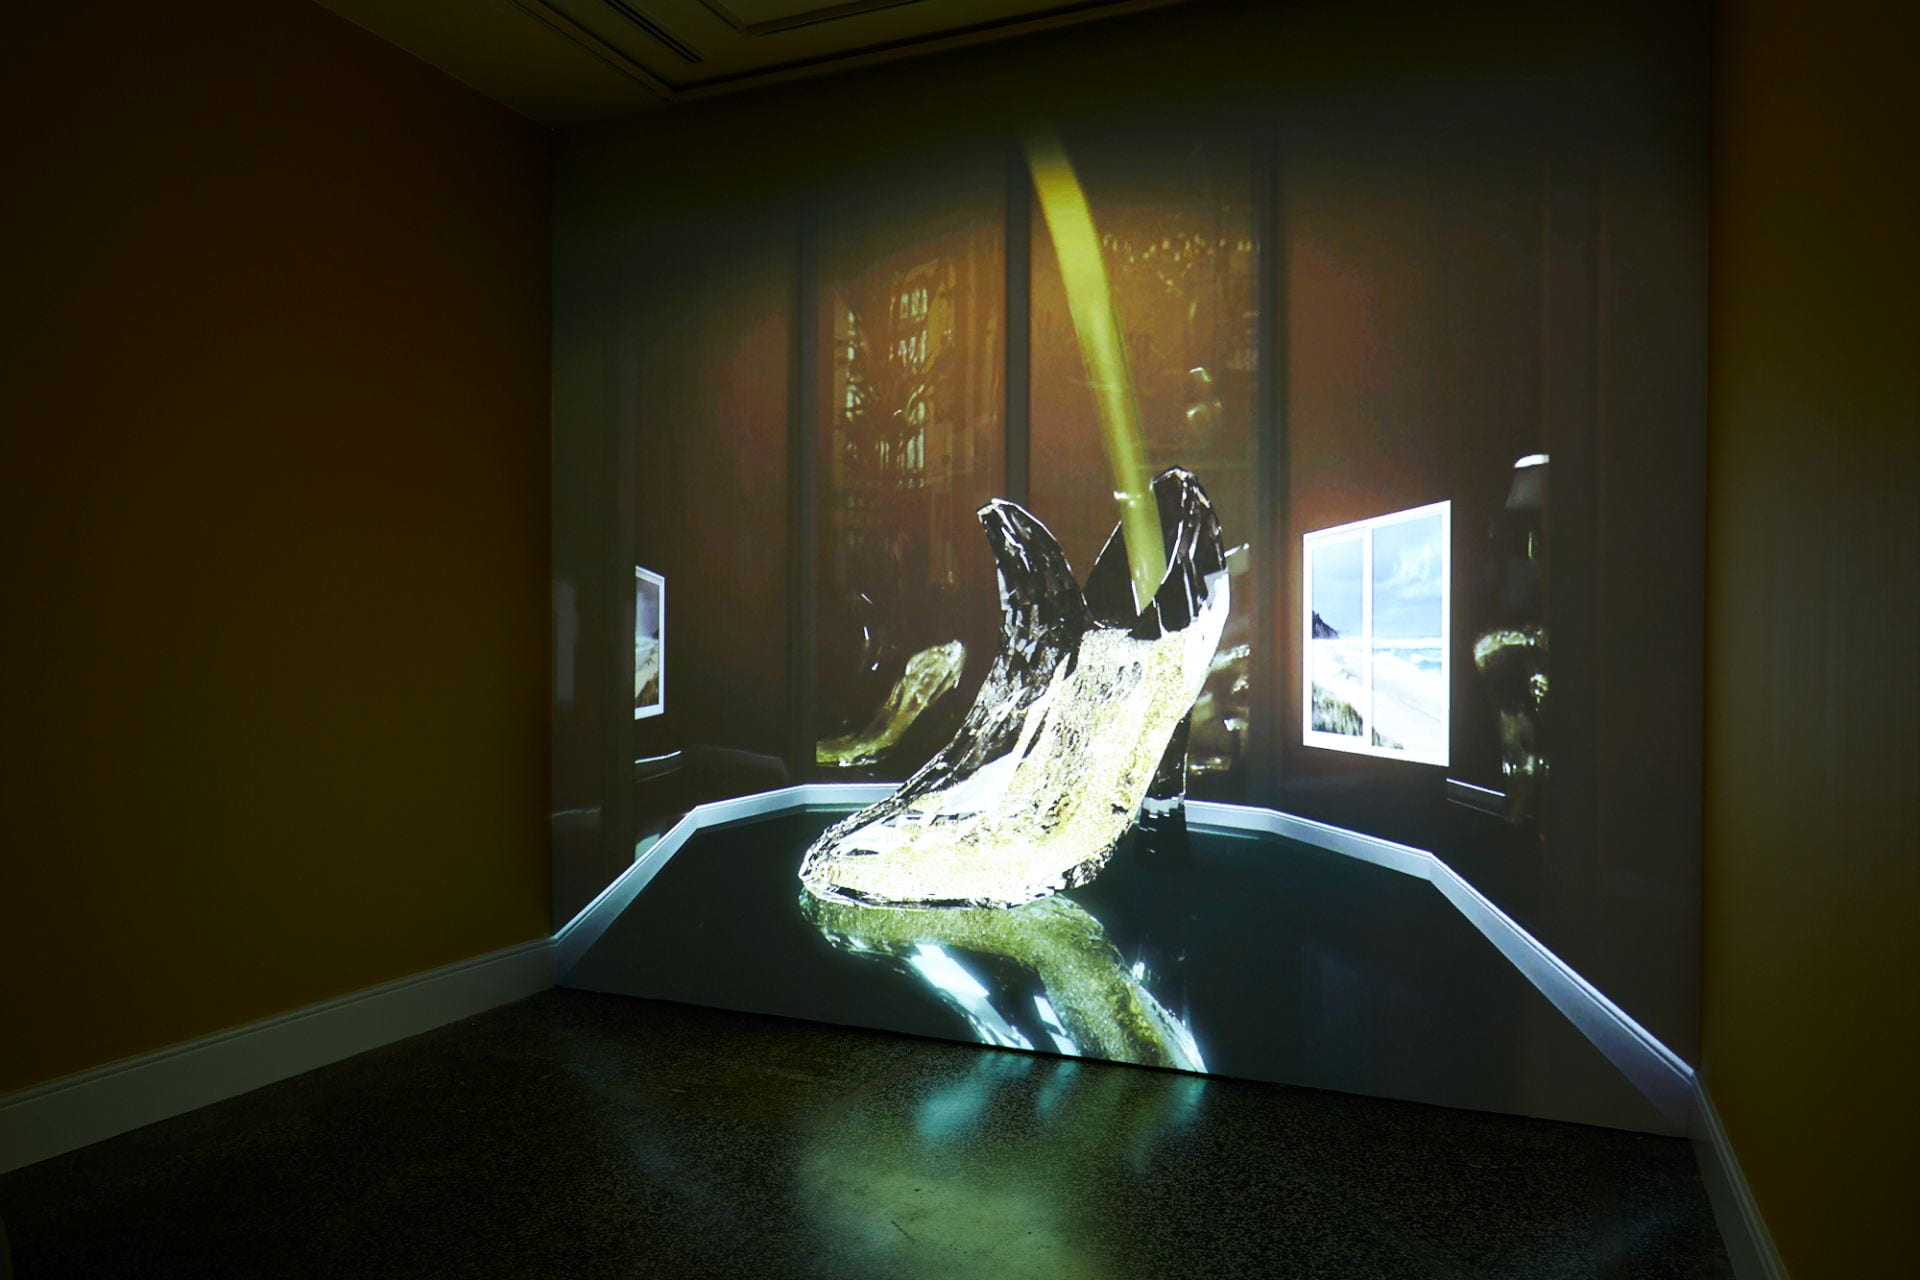 A projected film depicting a 3D computer generated model of a glass slipper being filled with champagne.